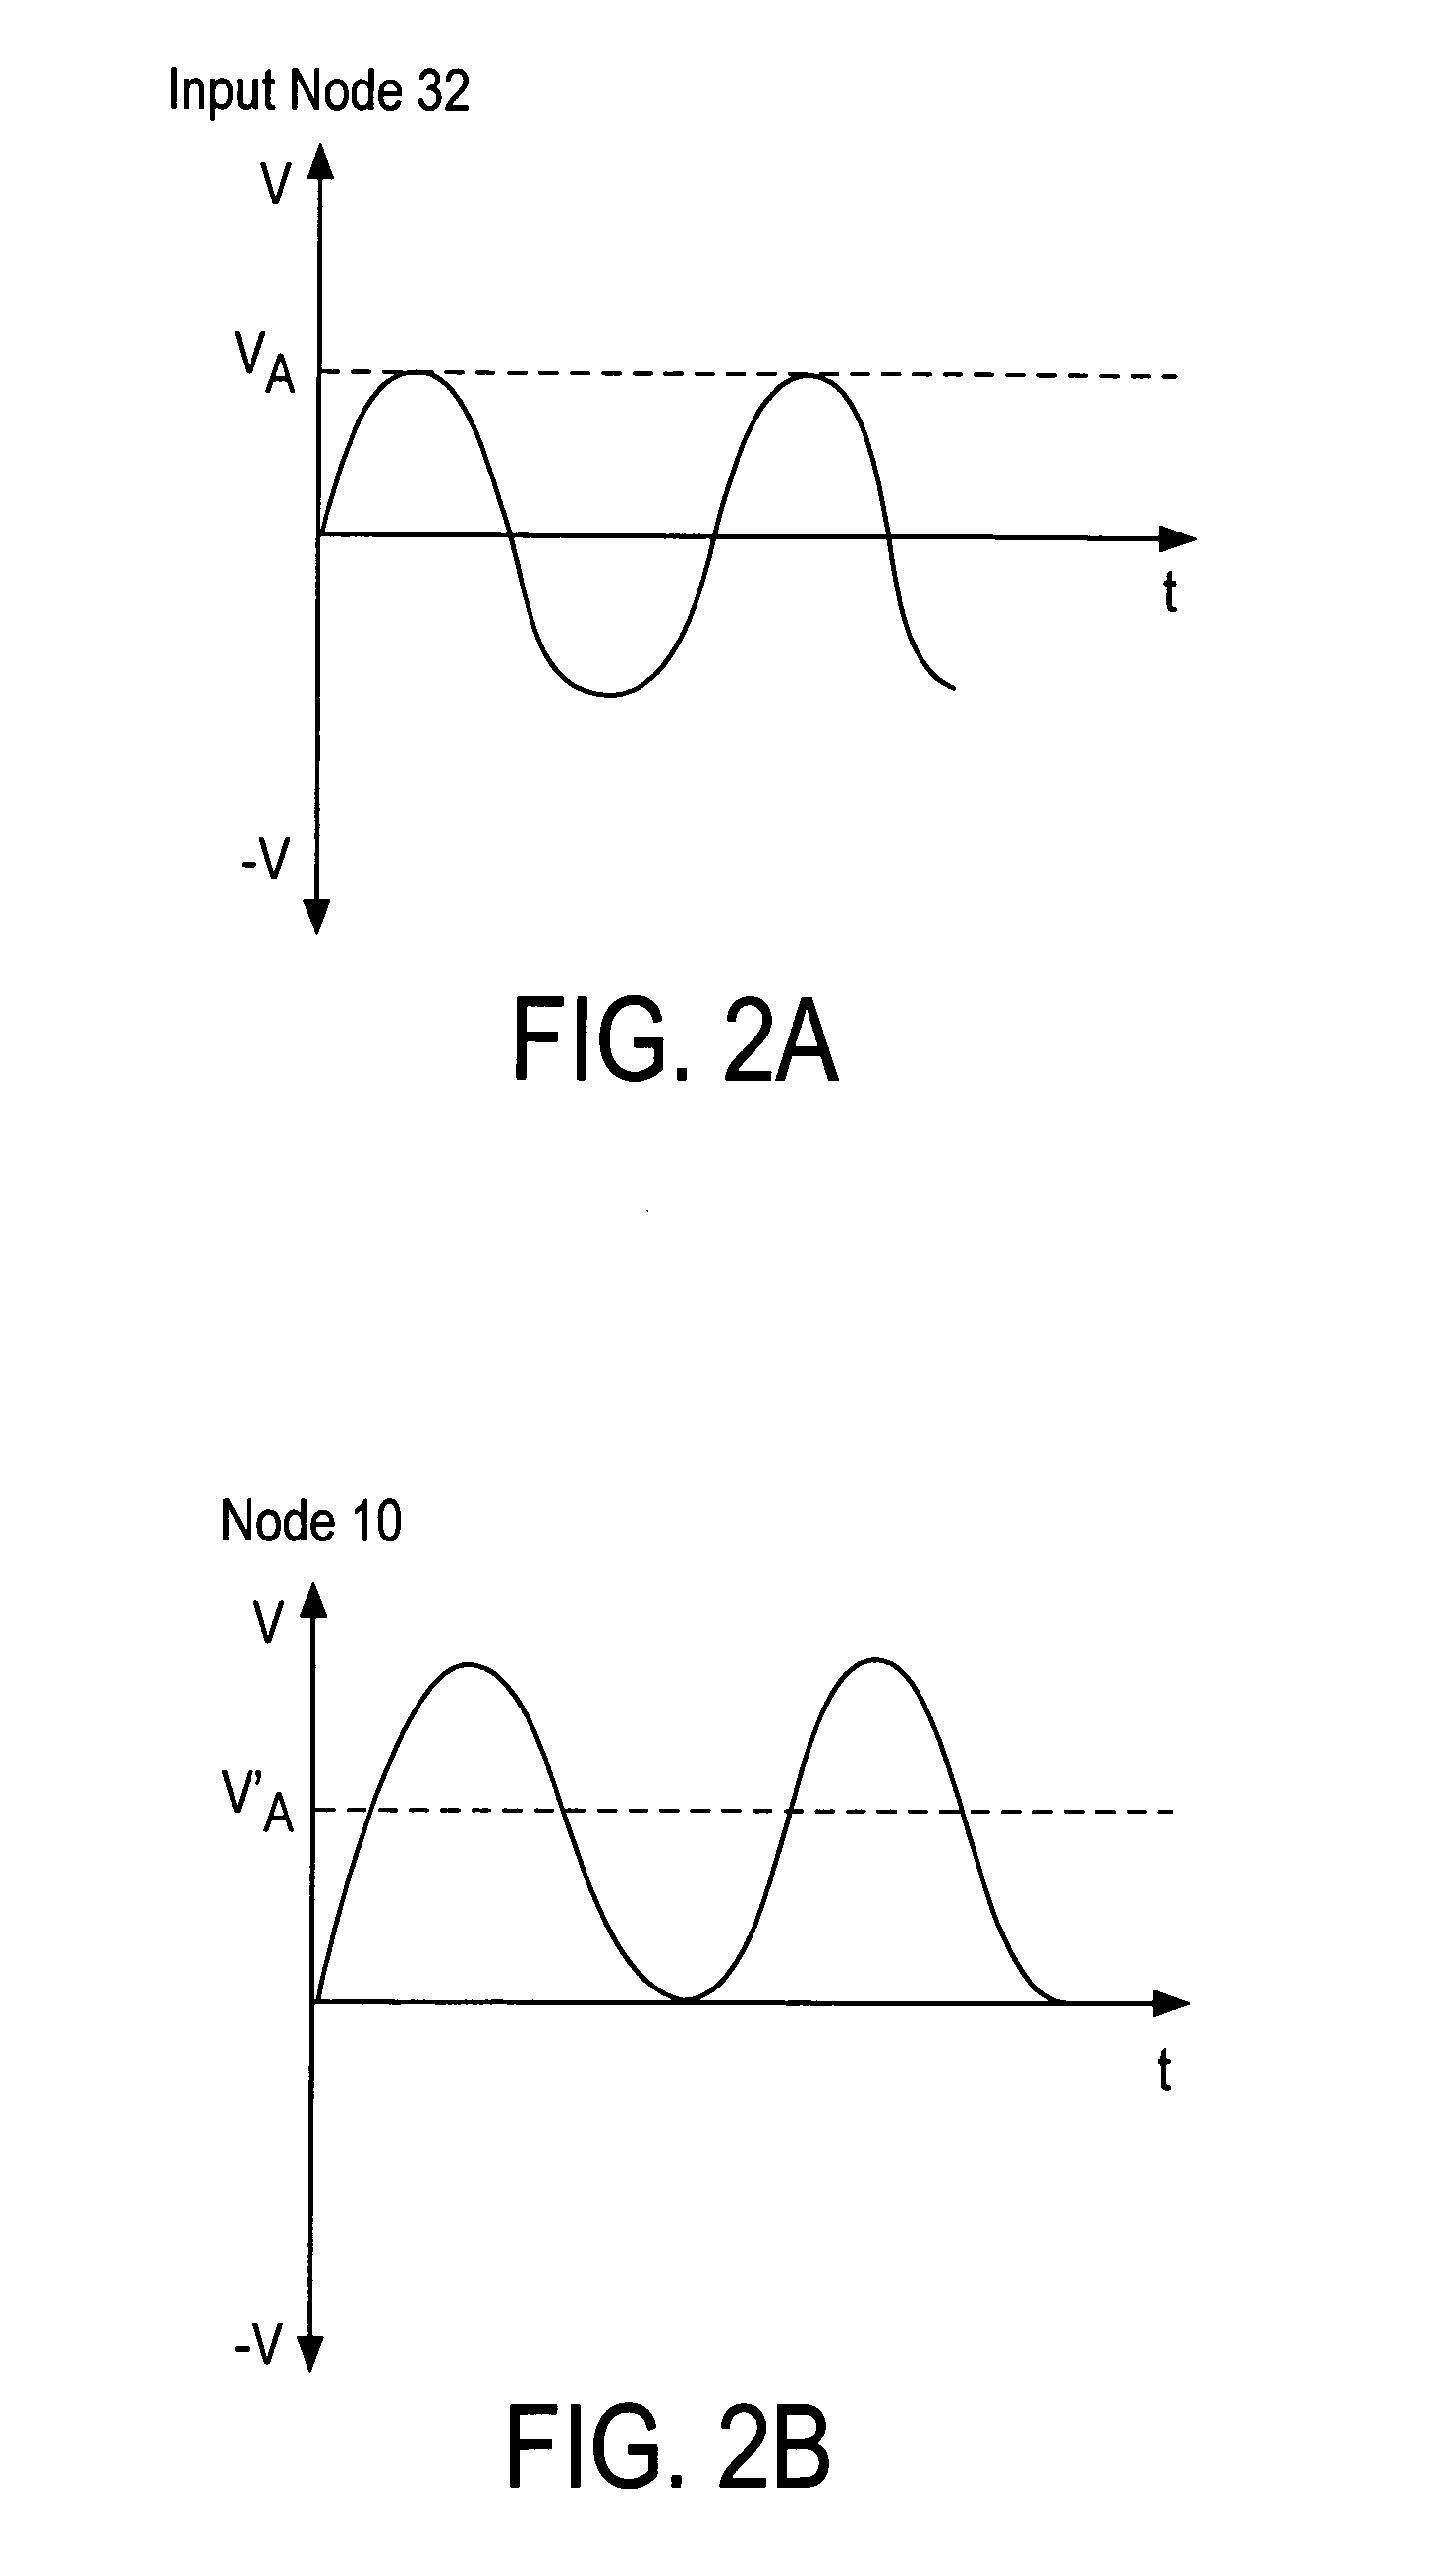 Envelope detector with DC level shifting